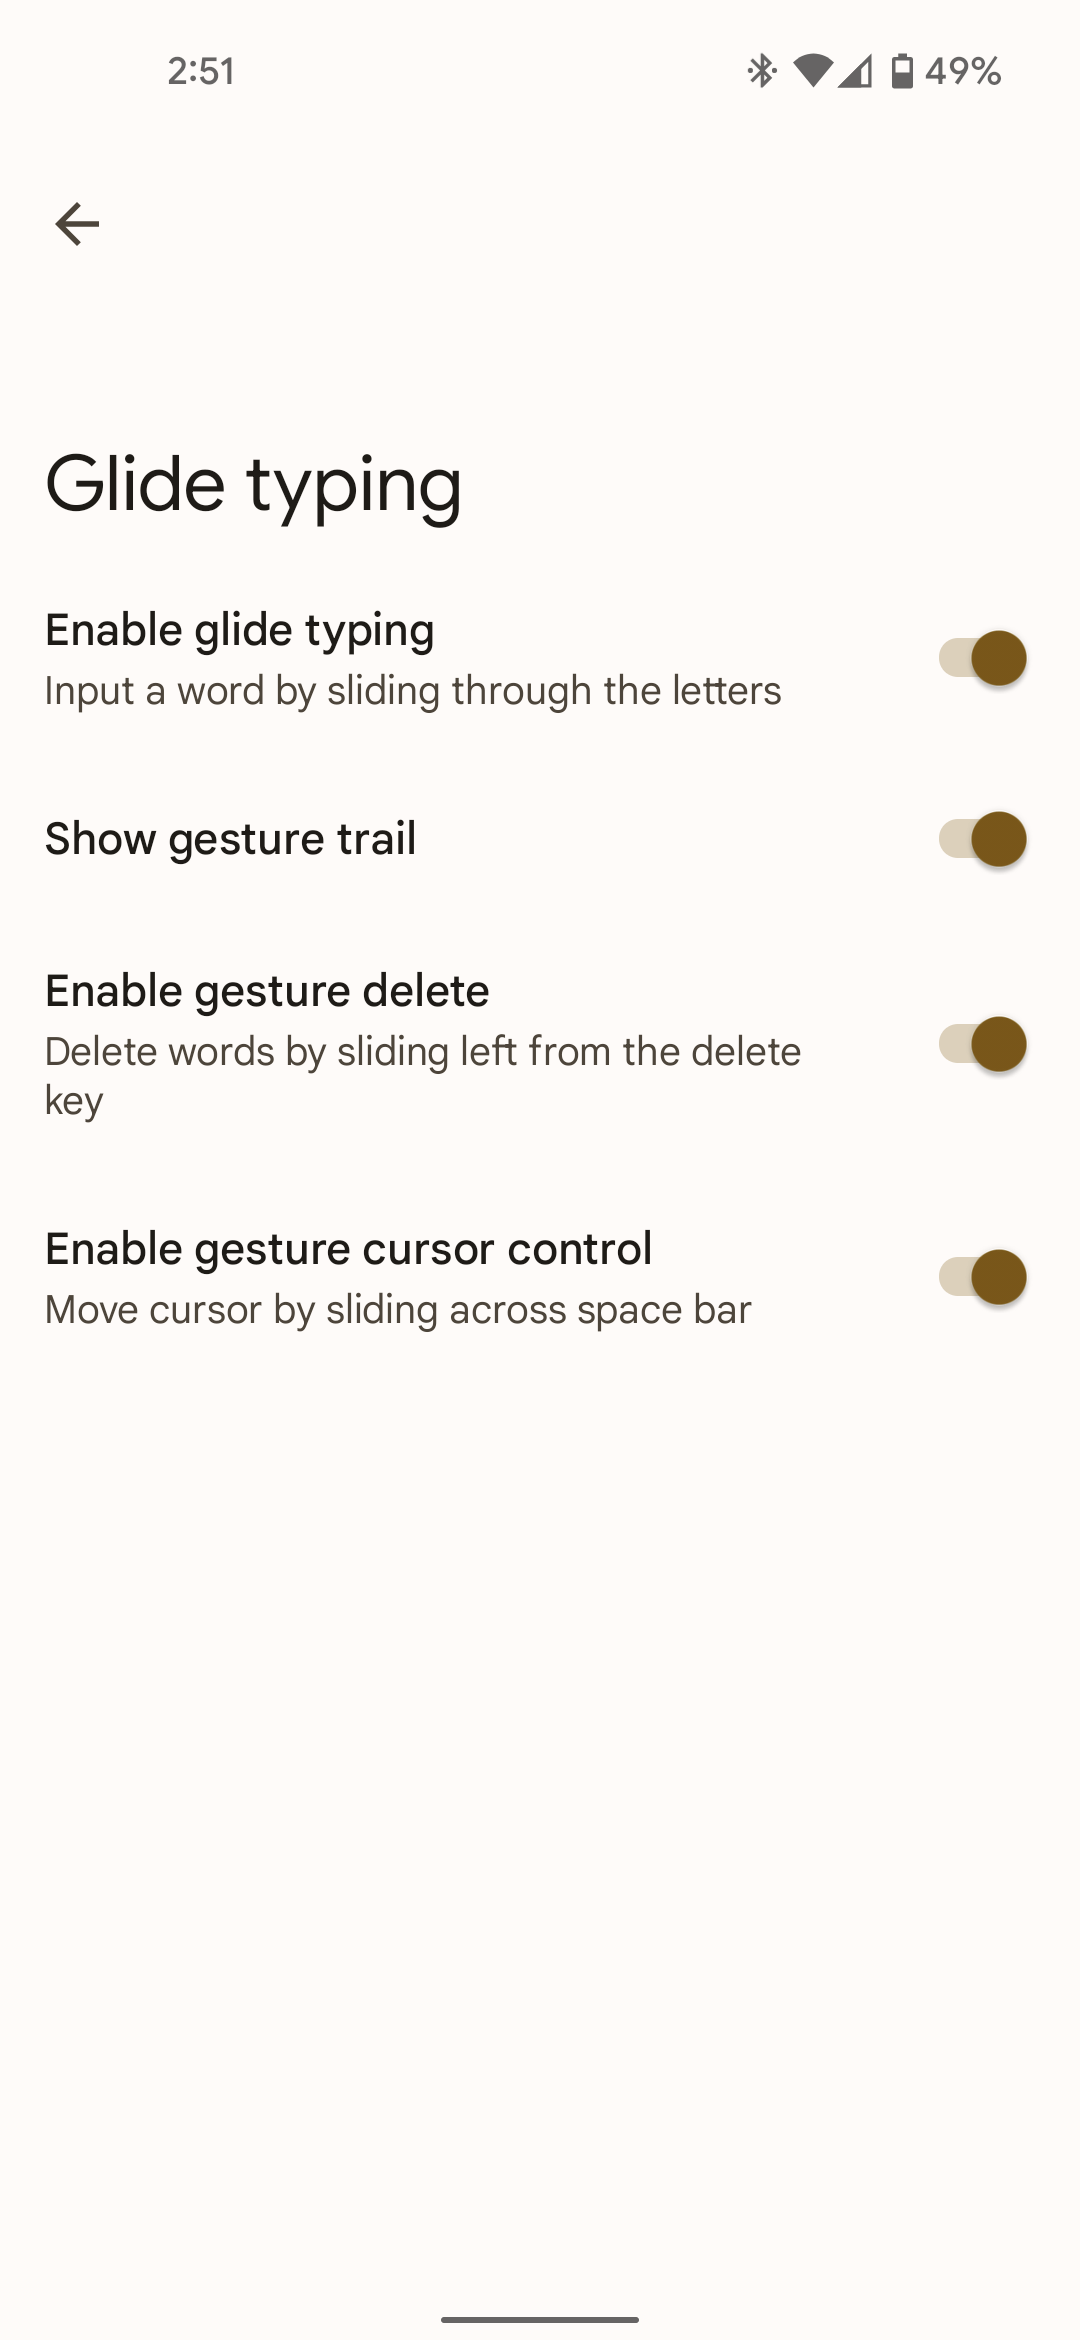 Gboard showing glide typing gesture suggestions